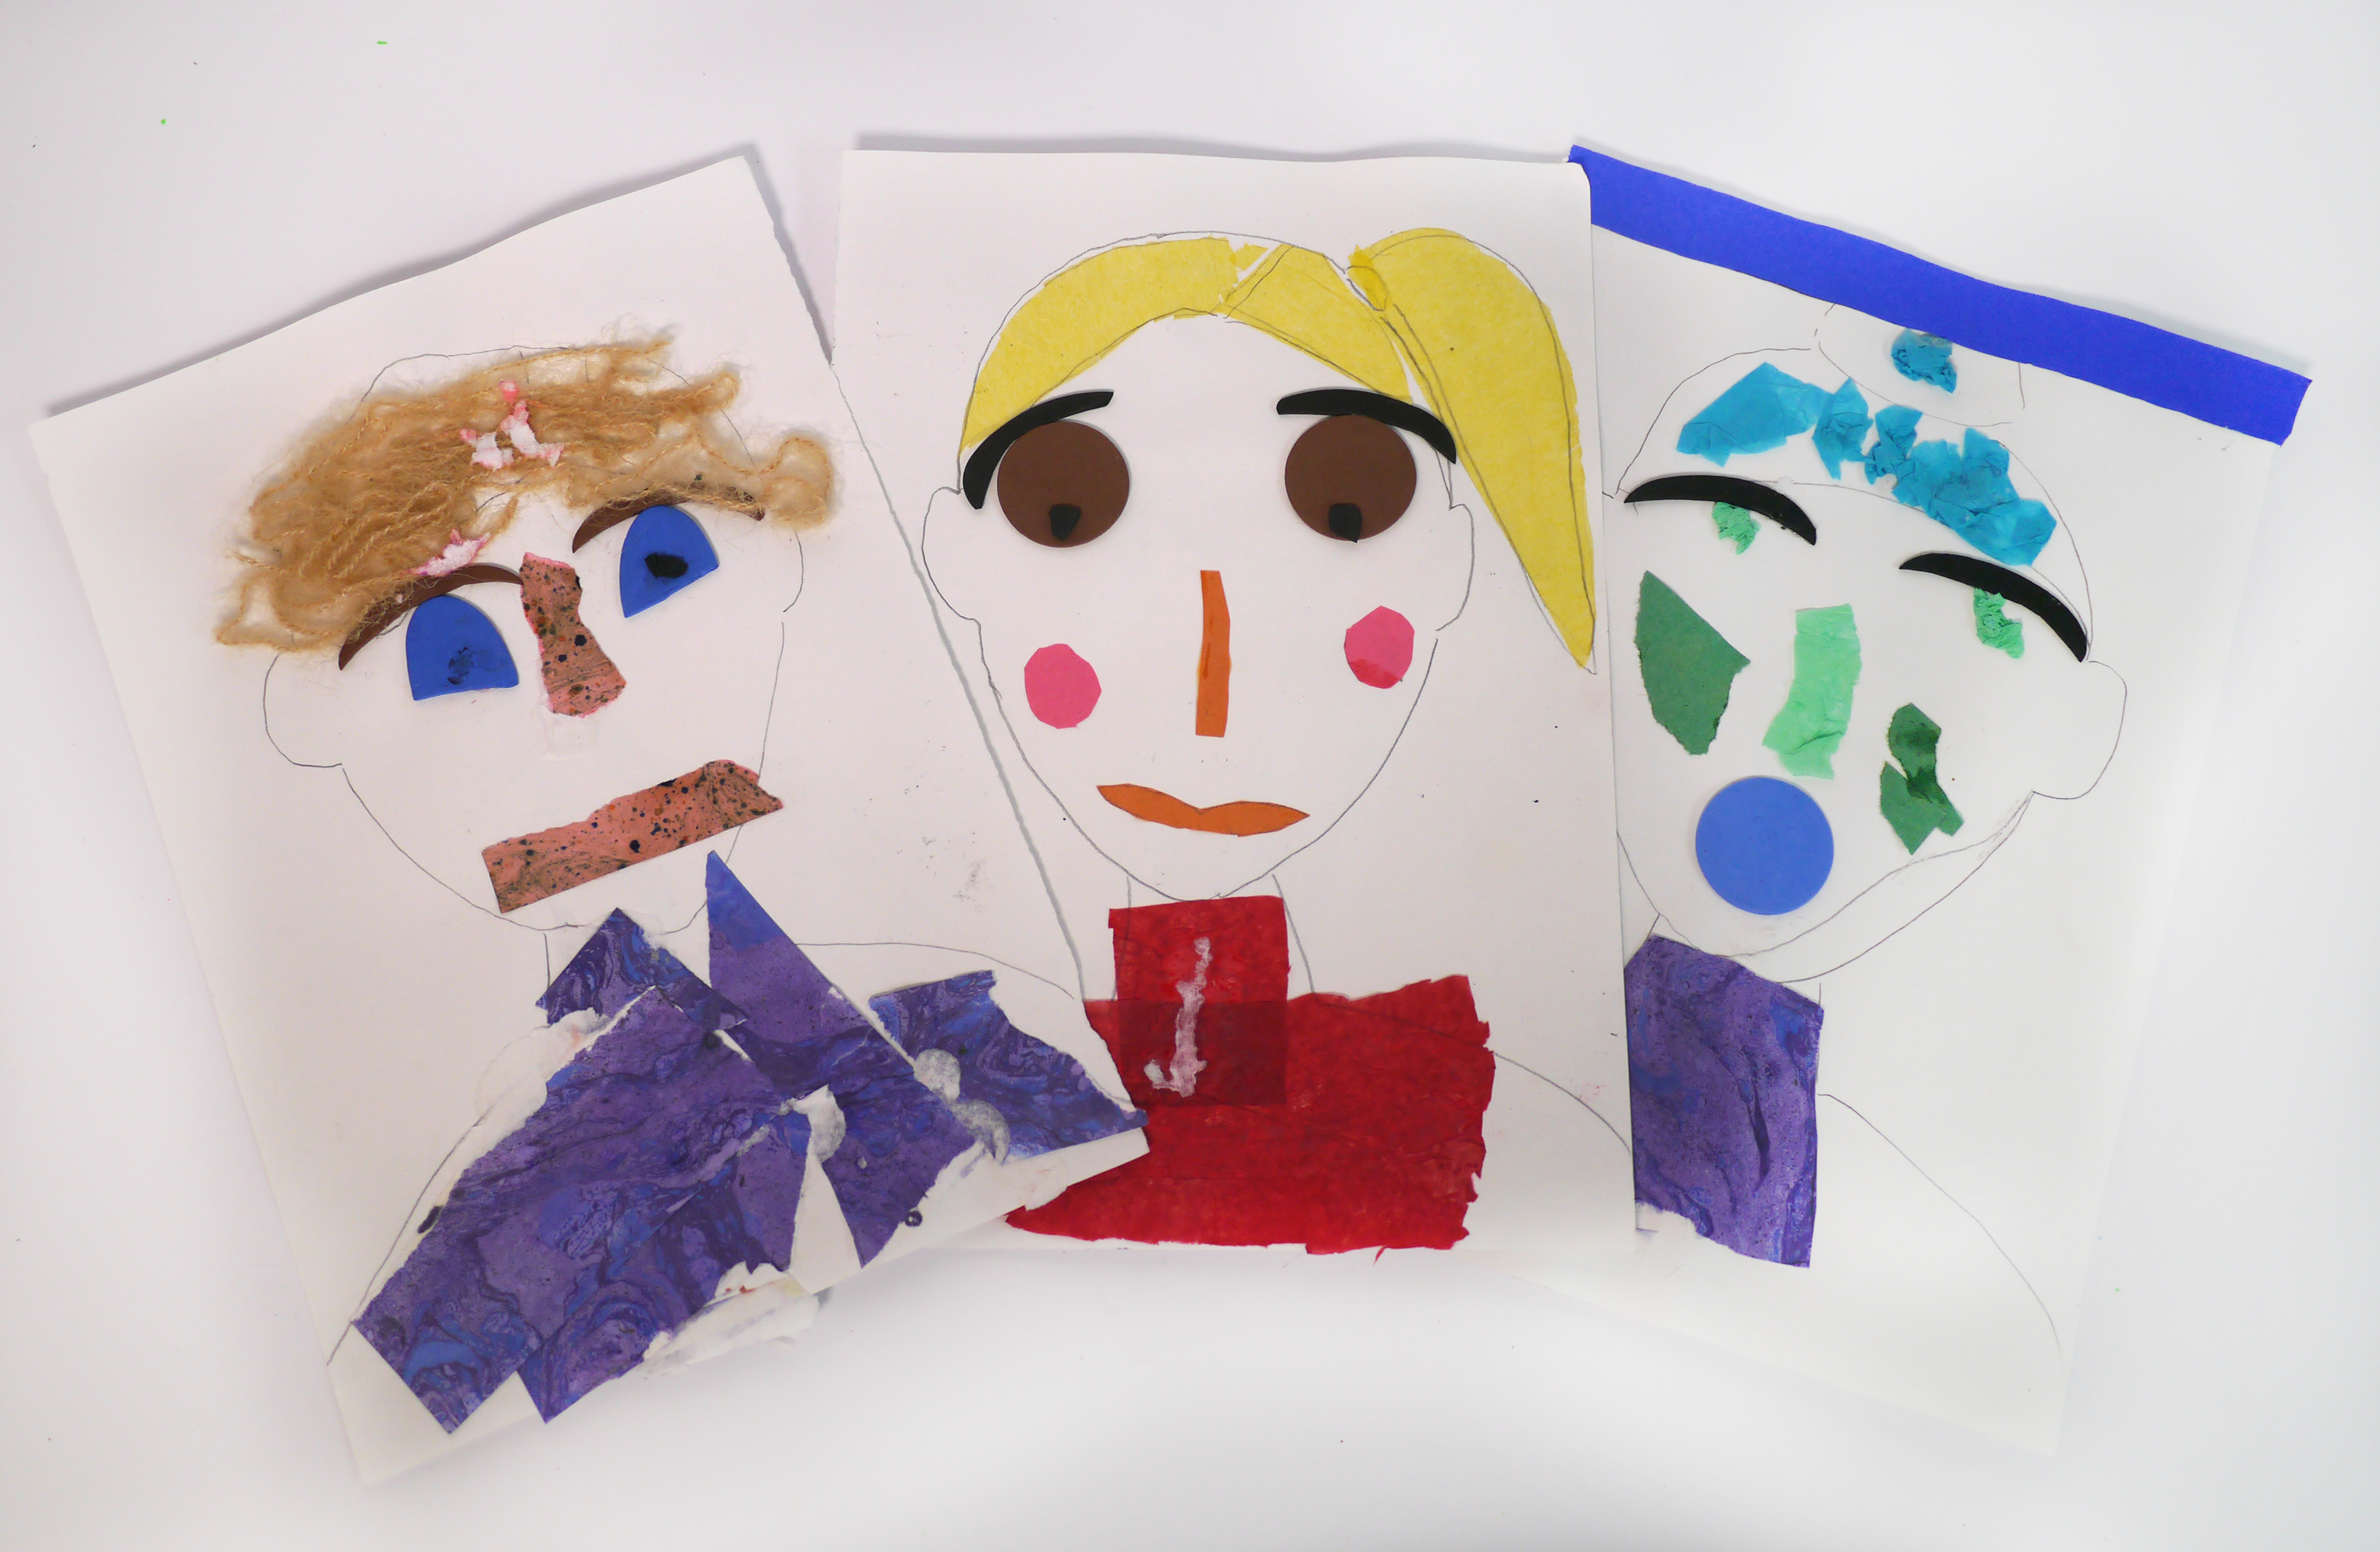 This image shows 3 decorated paper faces 